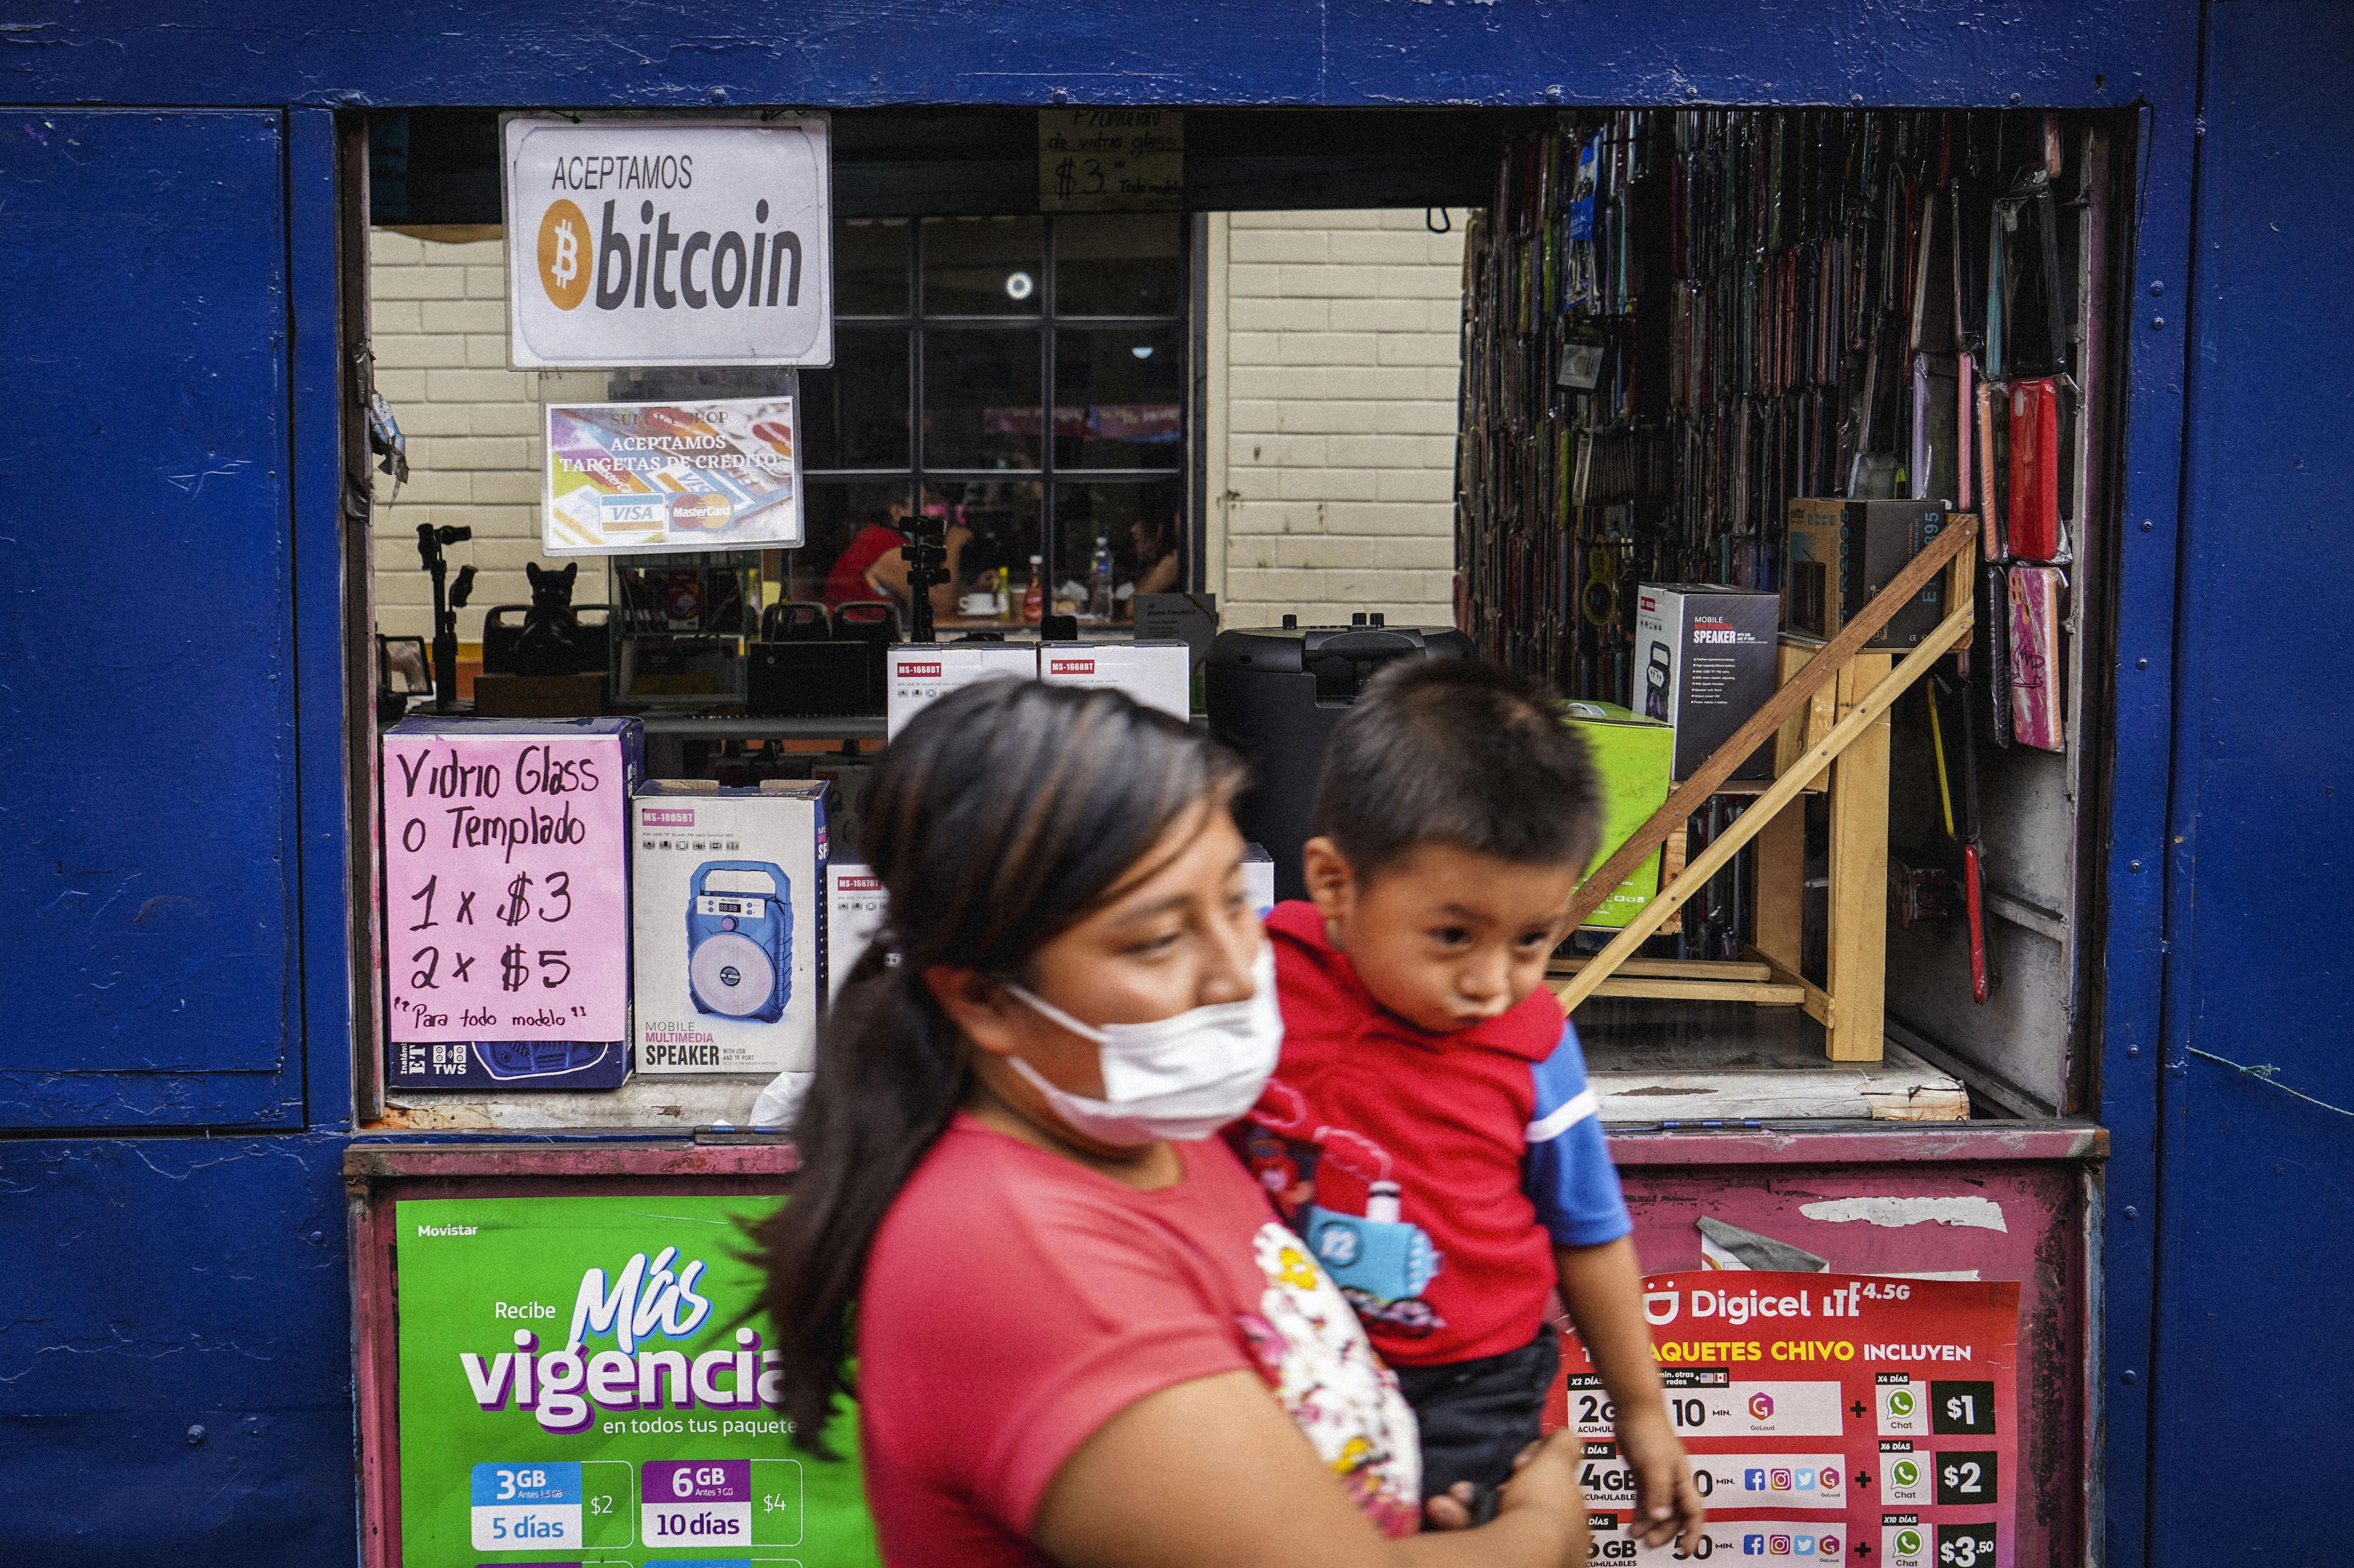 A woman carrying a child walks next to a sign displaying the acceptance of Bitcoin as a payment method on June 15, 2022 in San Salvador, El Salvador. El Salvador´s government has experienced losses of half of it´s $103 million US Dollar investement in Bitcoin as Bitcoin´s price fell to around $20,000 US Dollars. (Photo by Camilo Freedman/NurPhoto via Getty Images)